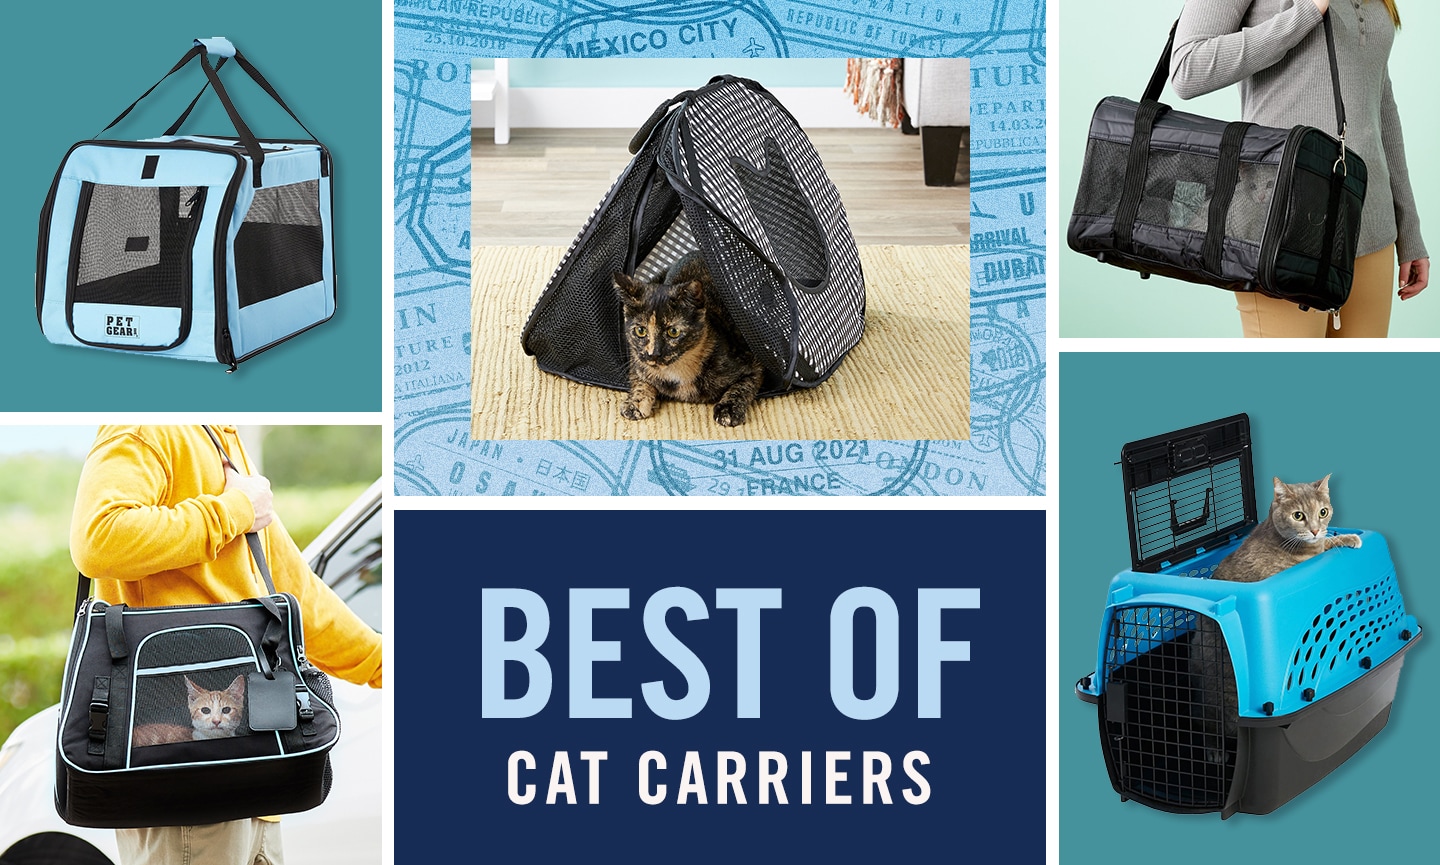 https://media-be.chewy.com/wp-content/uploads/2022/12/22092326/Best-Cat-Carriers.jpg